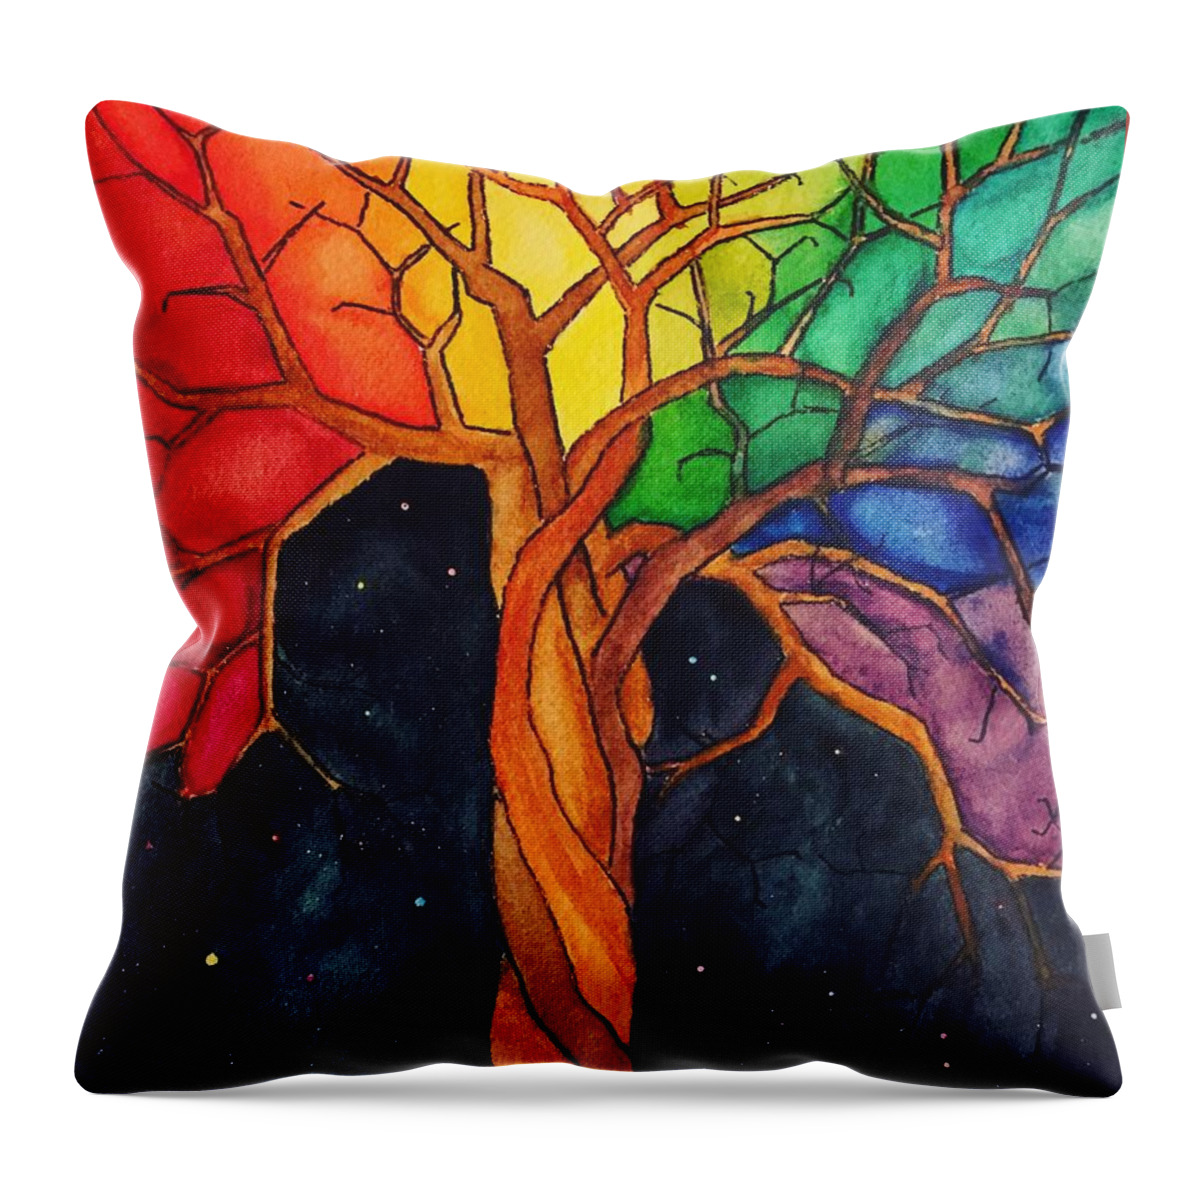 Rainbow Throw Pillow featuring the painting Rainbow Tree with Night Sky by Vonda Drees